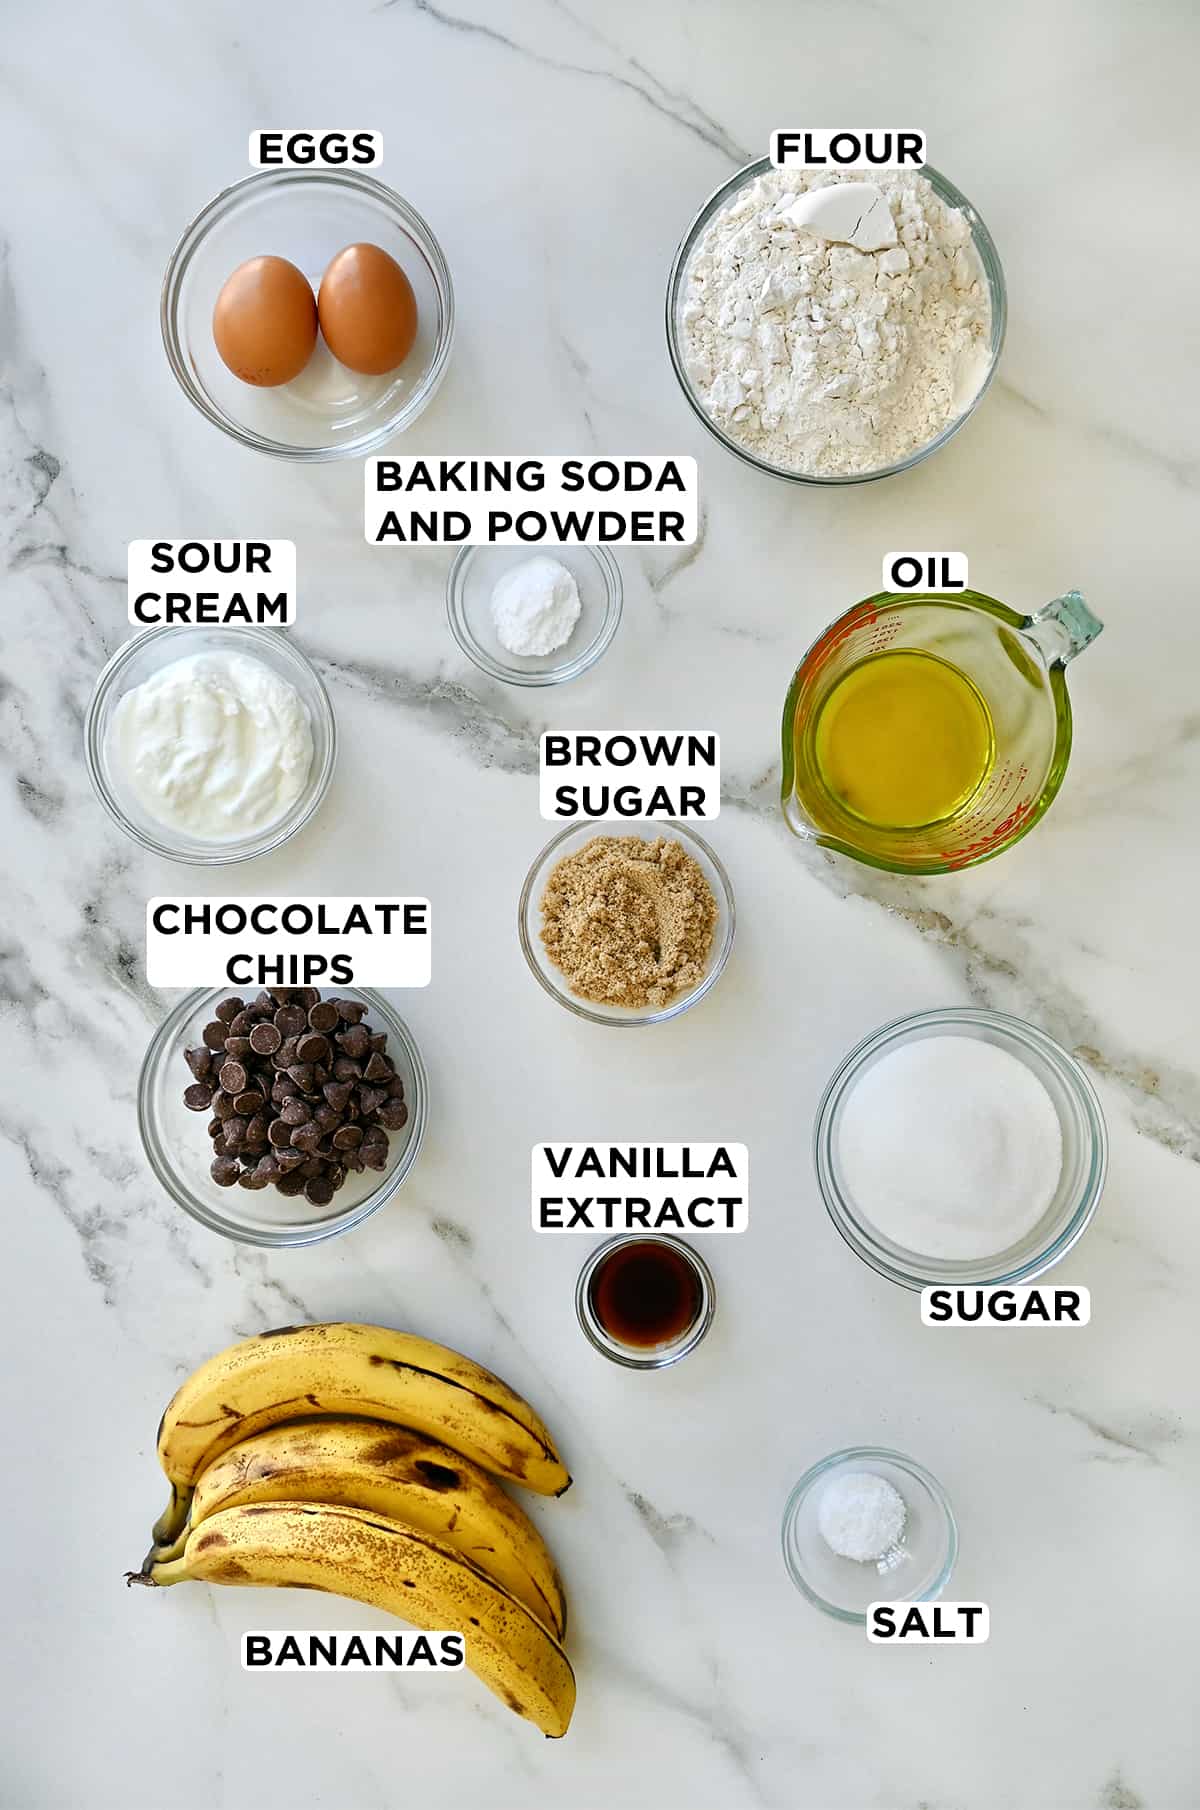 Three ripe bananas next to various sizes of glass bowls containing eggs, baking soda and powder, flour, sour cream, chocolate chips, vanilla extract, sugar, salt and a measuring cup filled with olive oil.